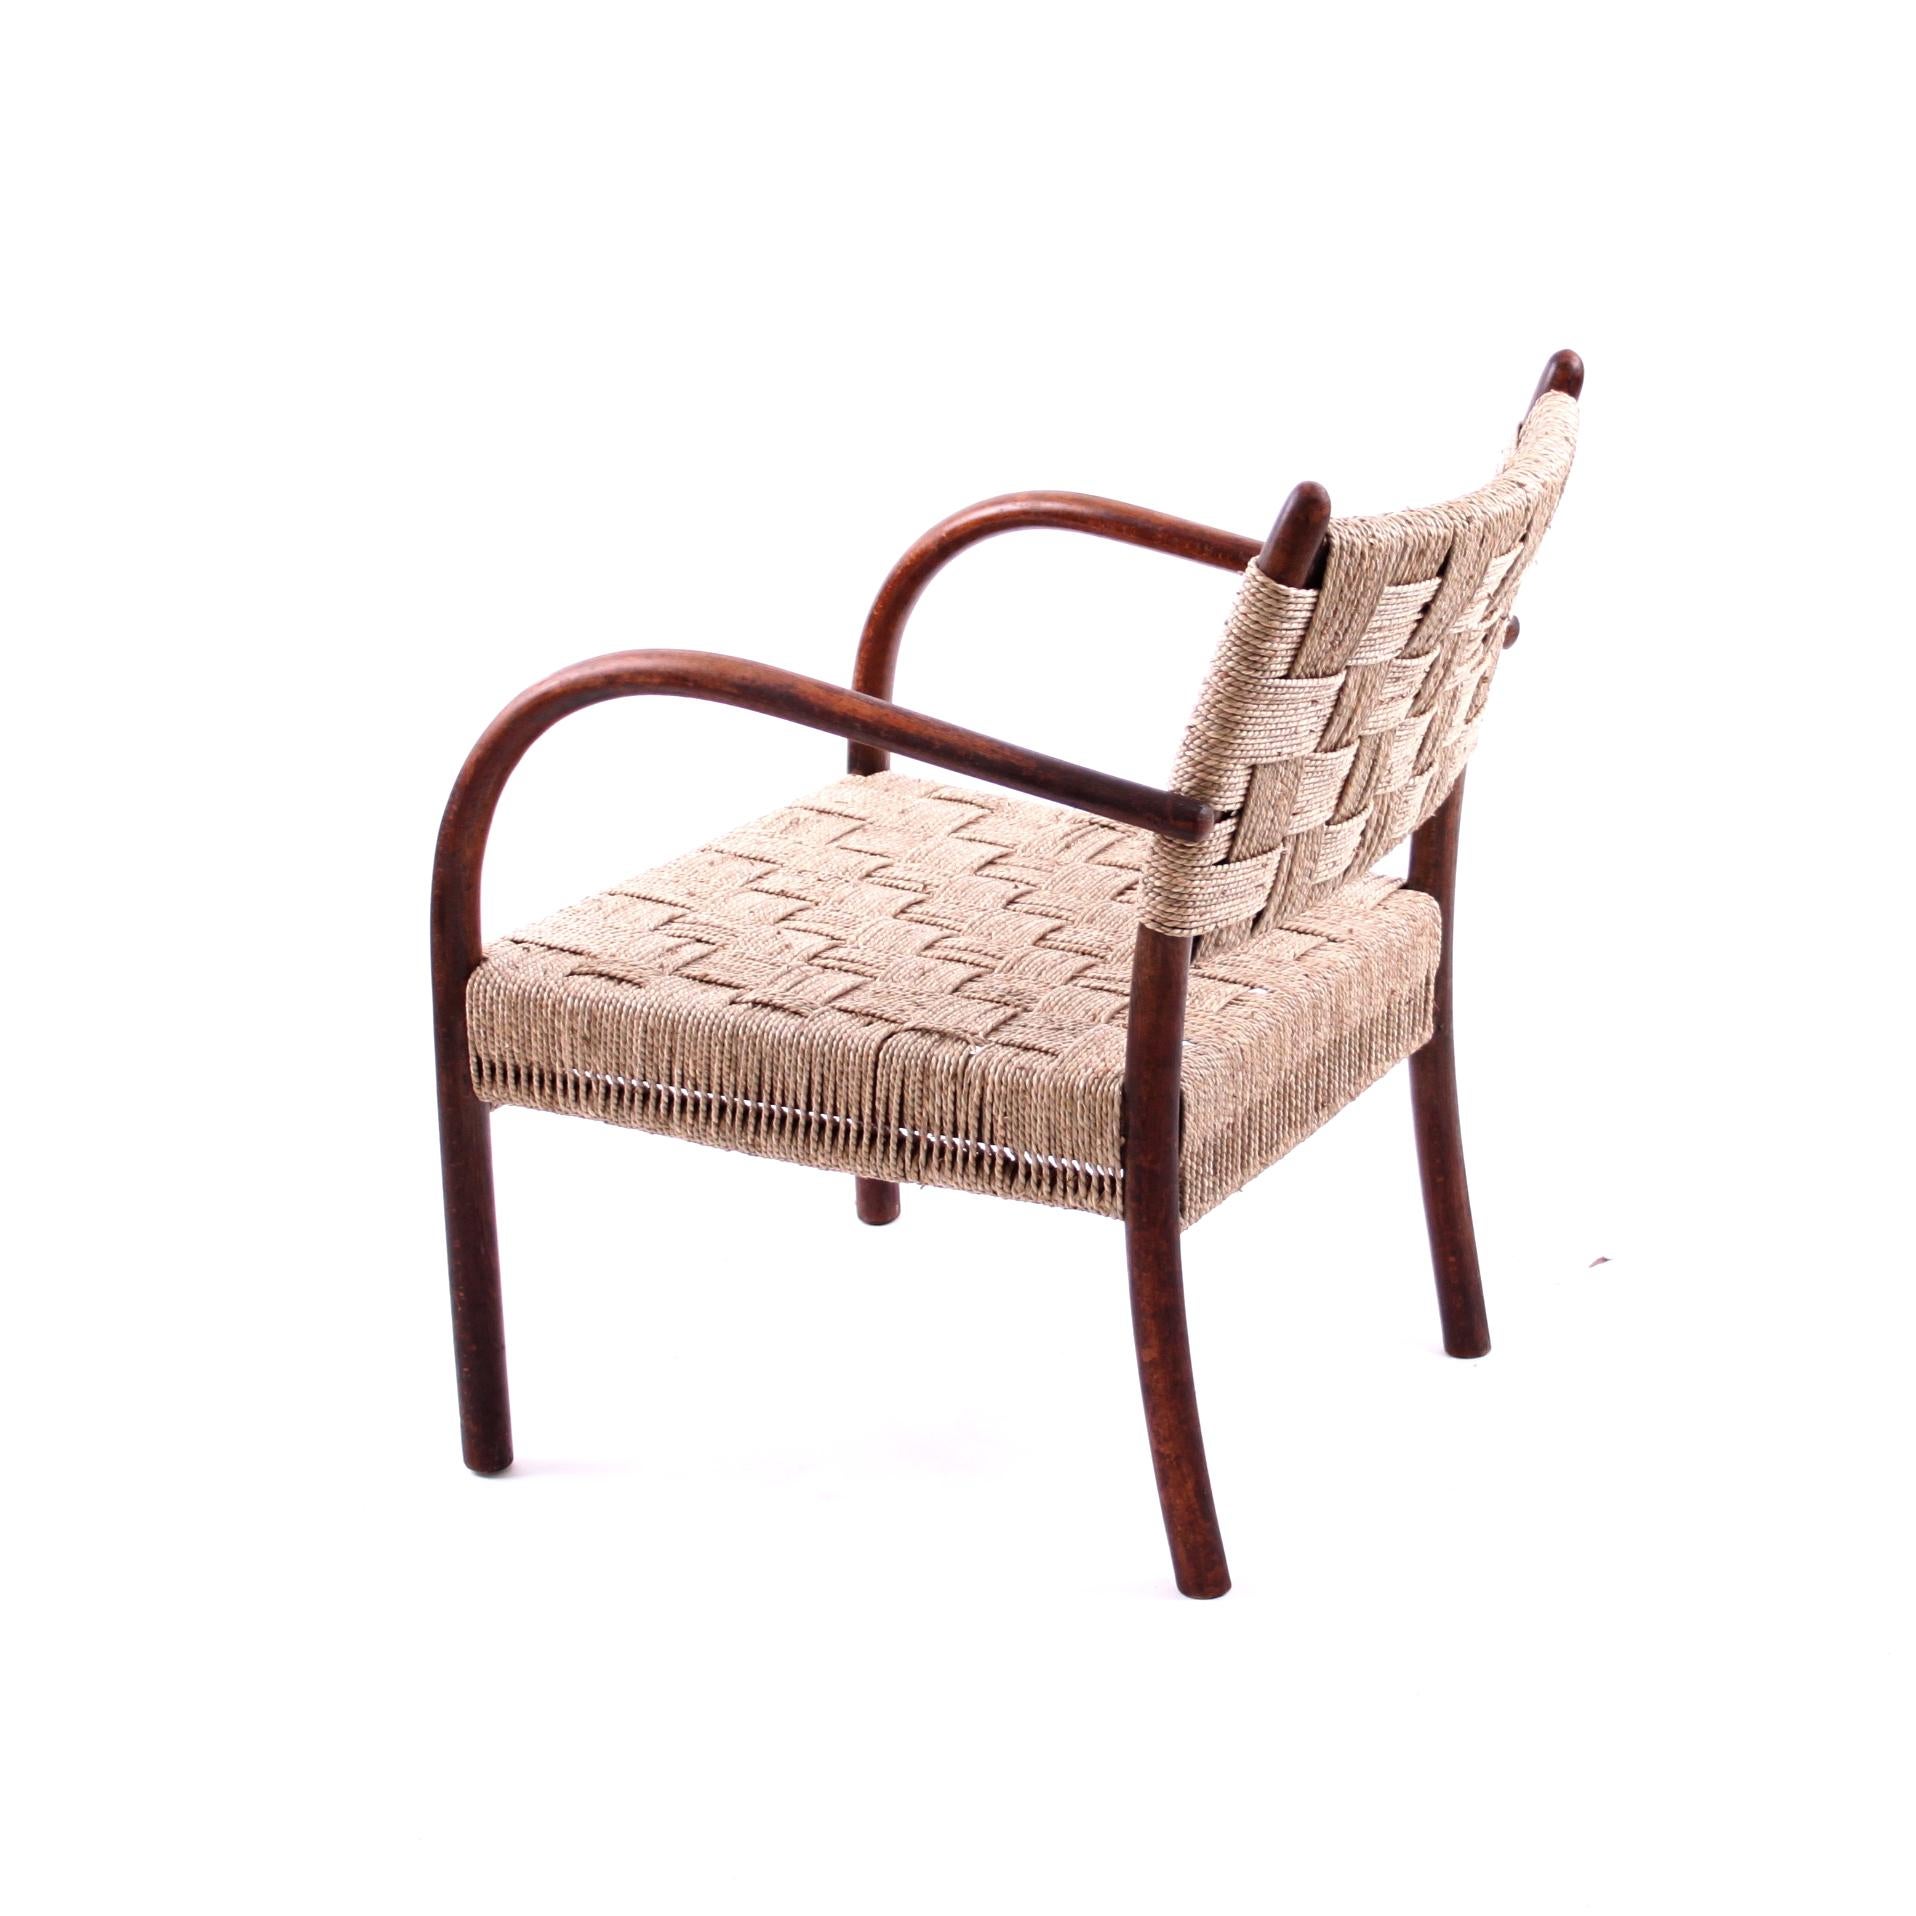 Mid-Century Modern K. Scröder Armchair, Stained Beech and Woven Seagrass, Denmark, 1930s